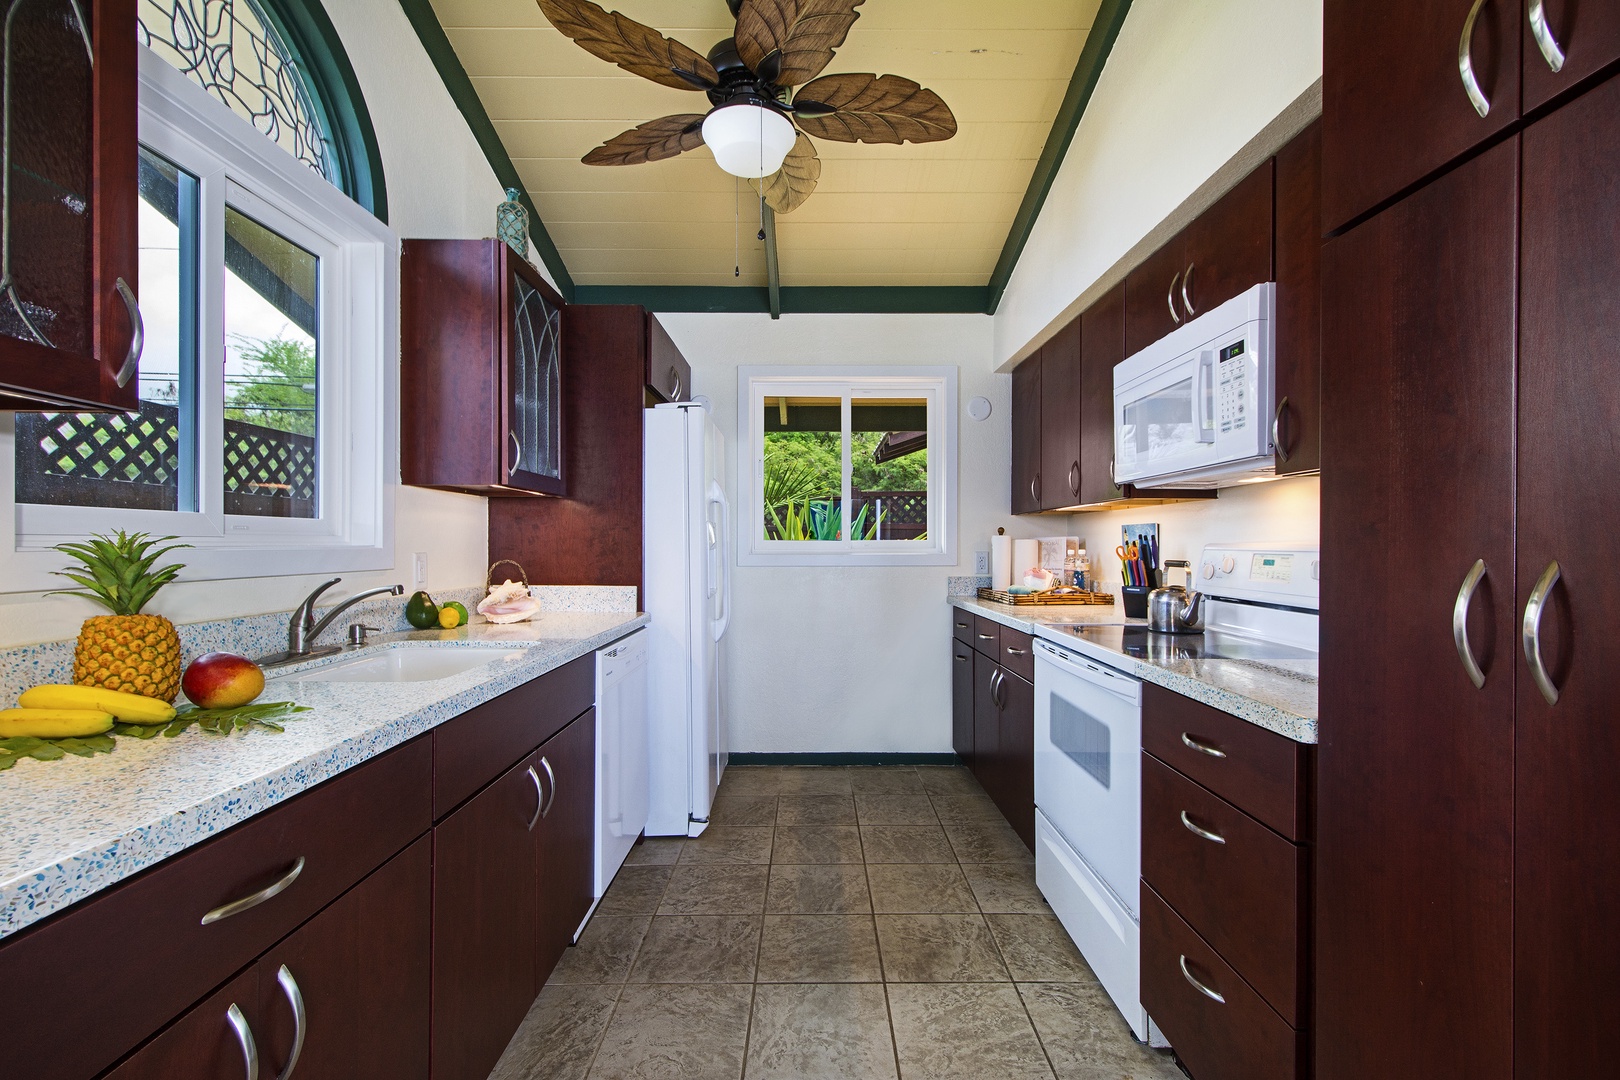 Kailua Kona Vacation Rentals, The Cottage - Newly Remodeled Kitchen Featuring New Appliances